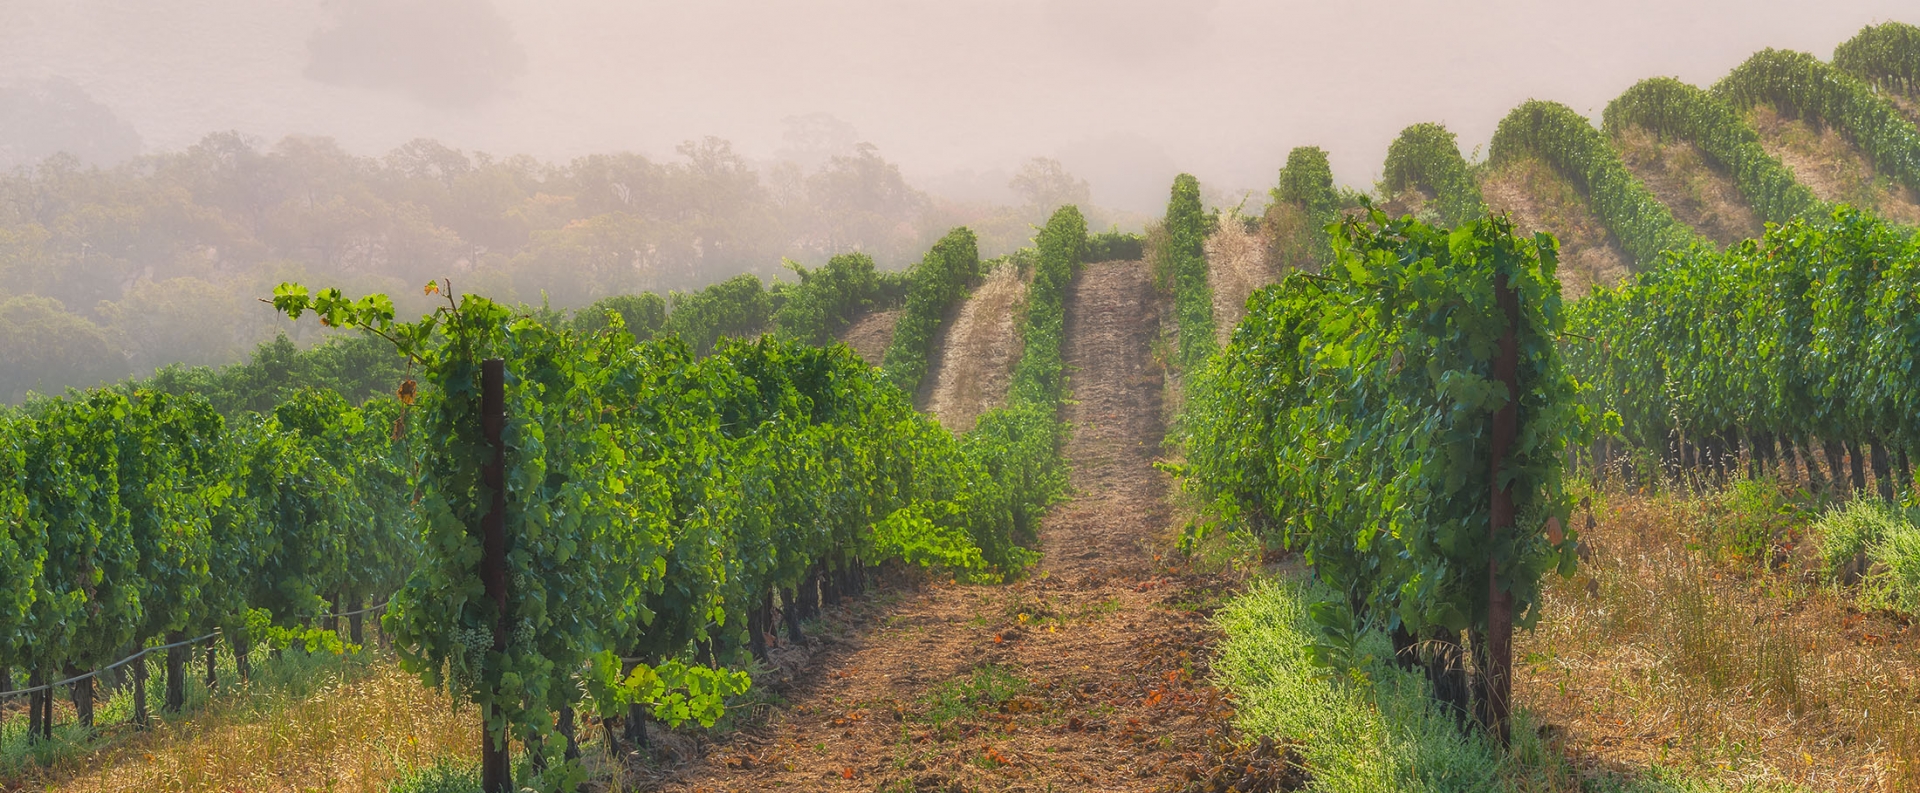 Napa Valley vineyards on a foggy morning in the summer